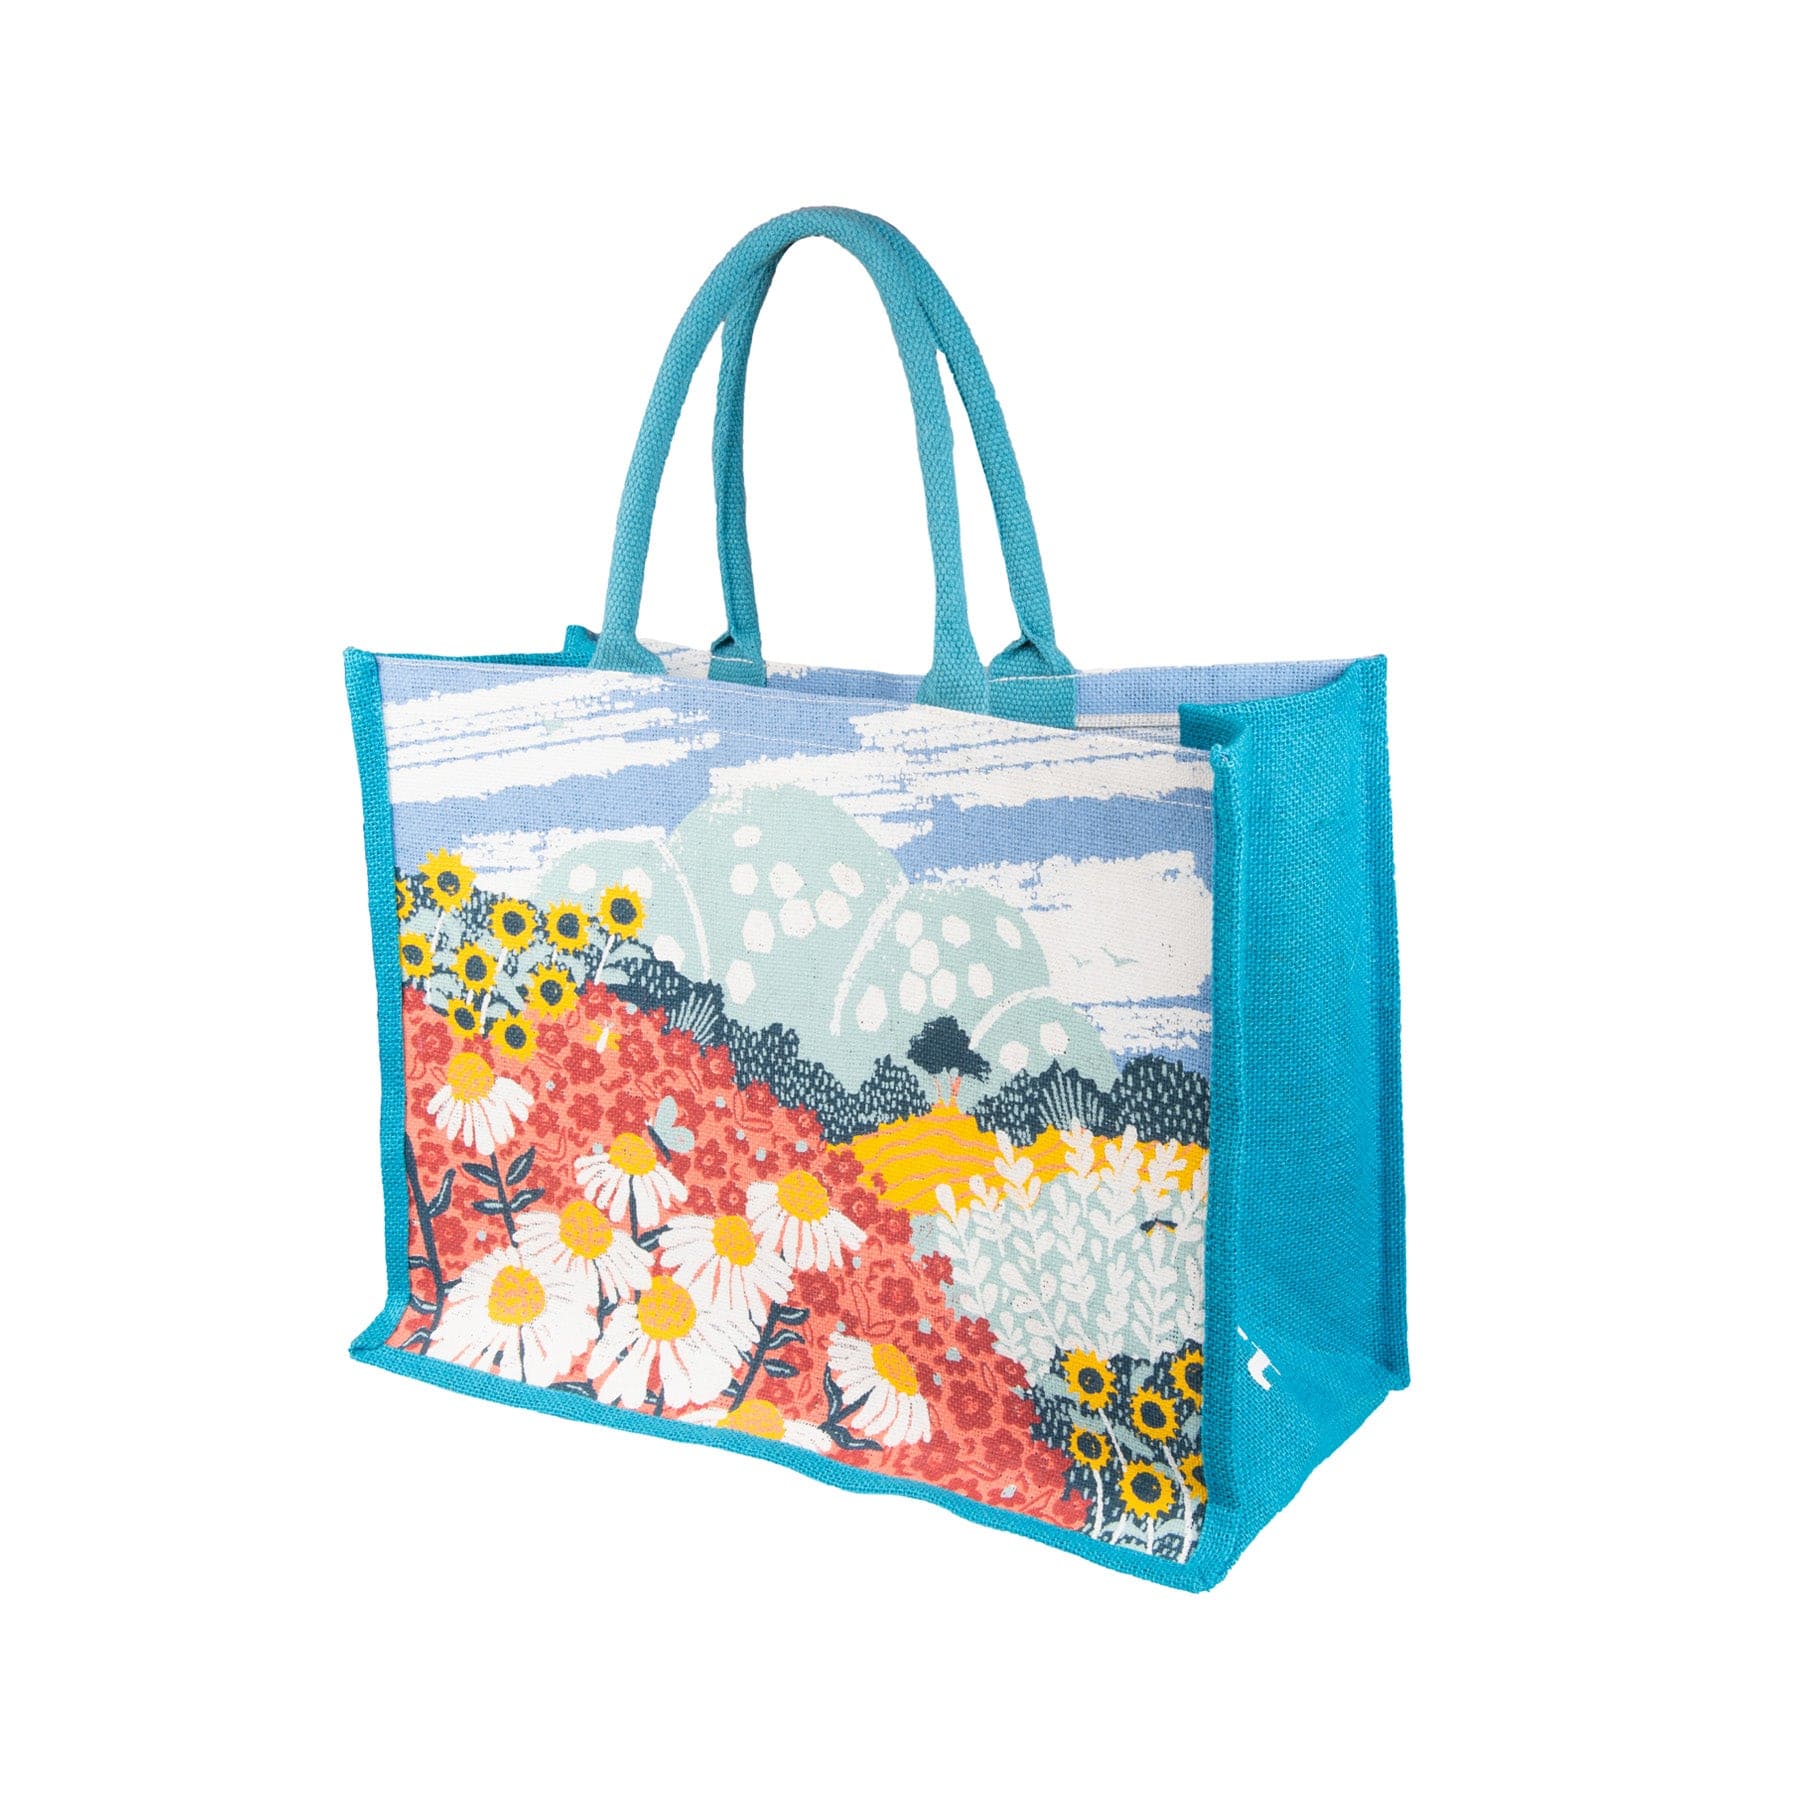 Colorful floral tote bag with blue handles on white background, featuring daisy and sunflower print with scenic landscape design